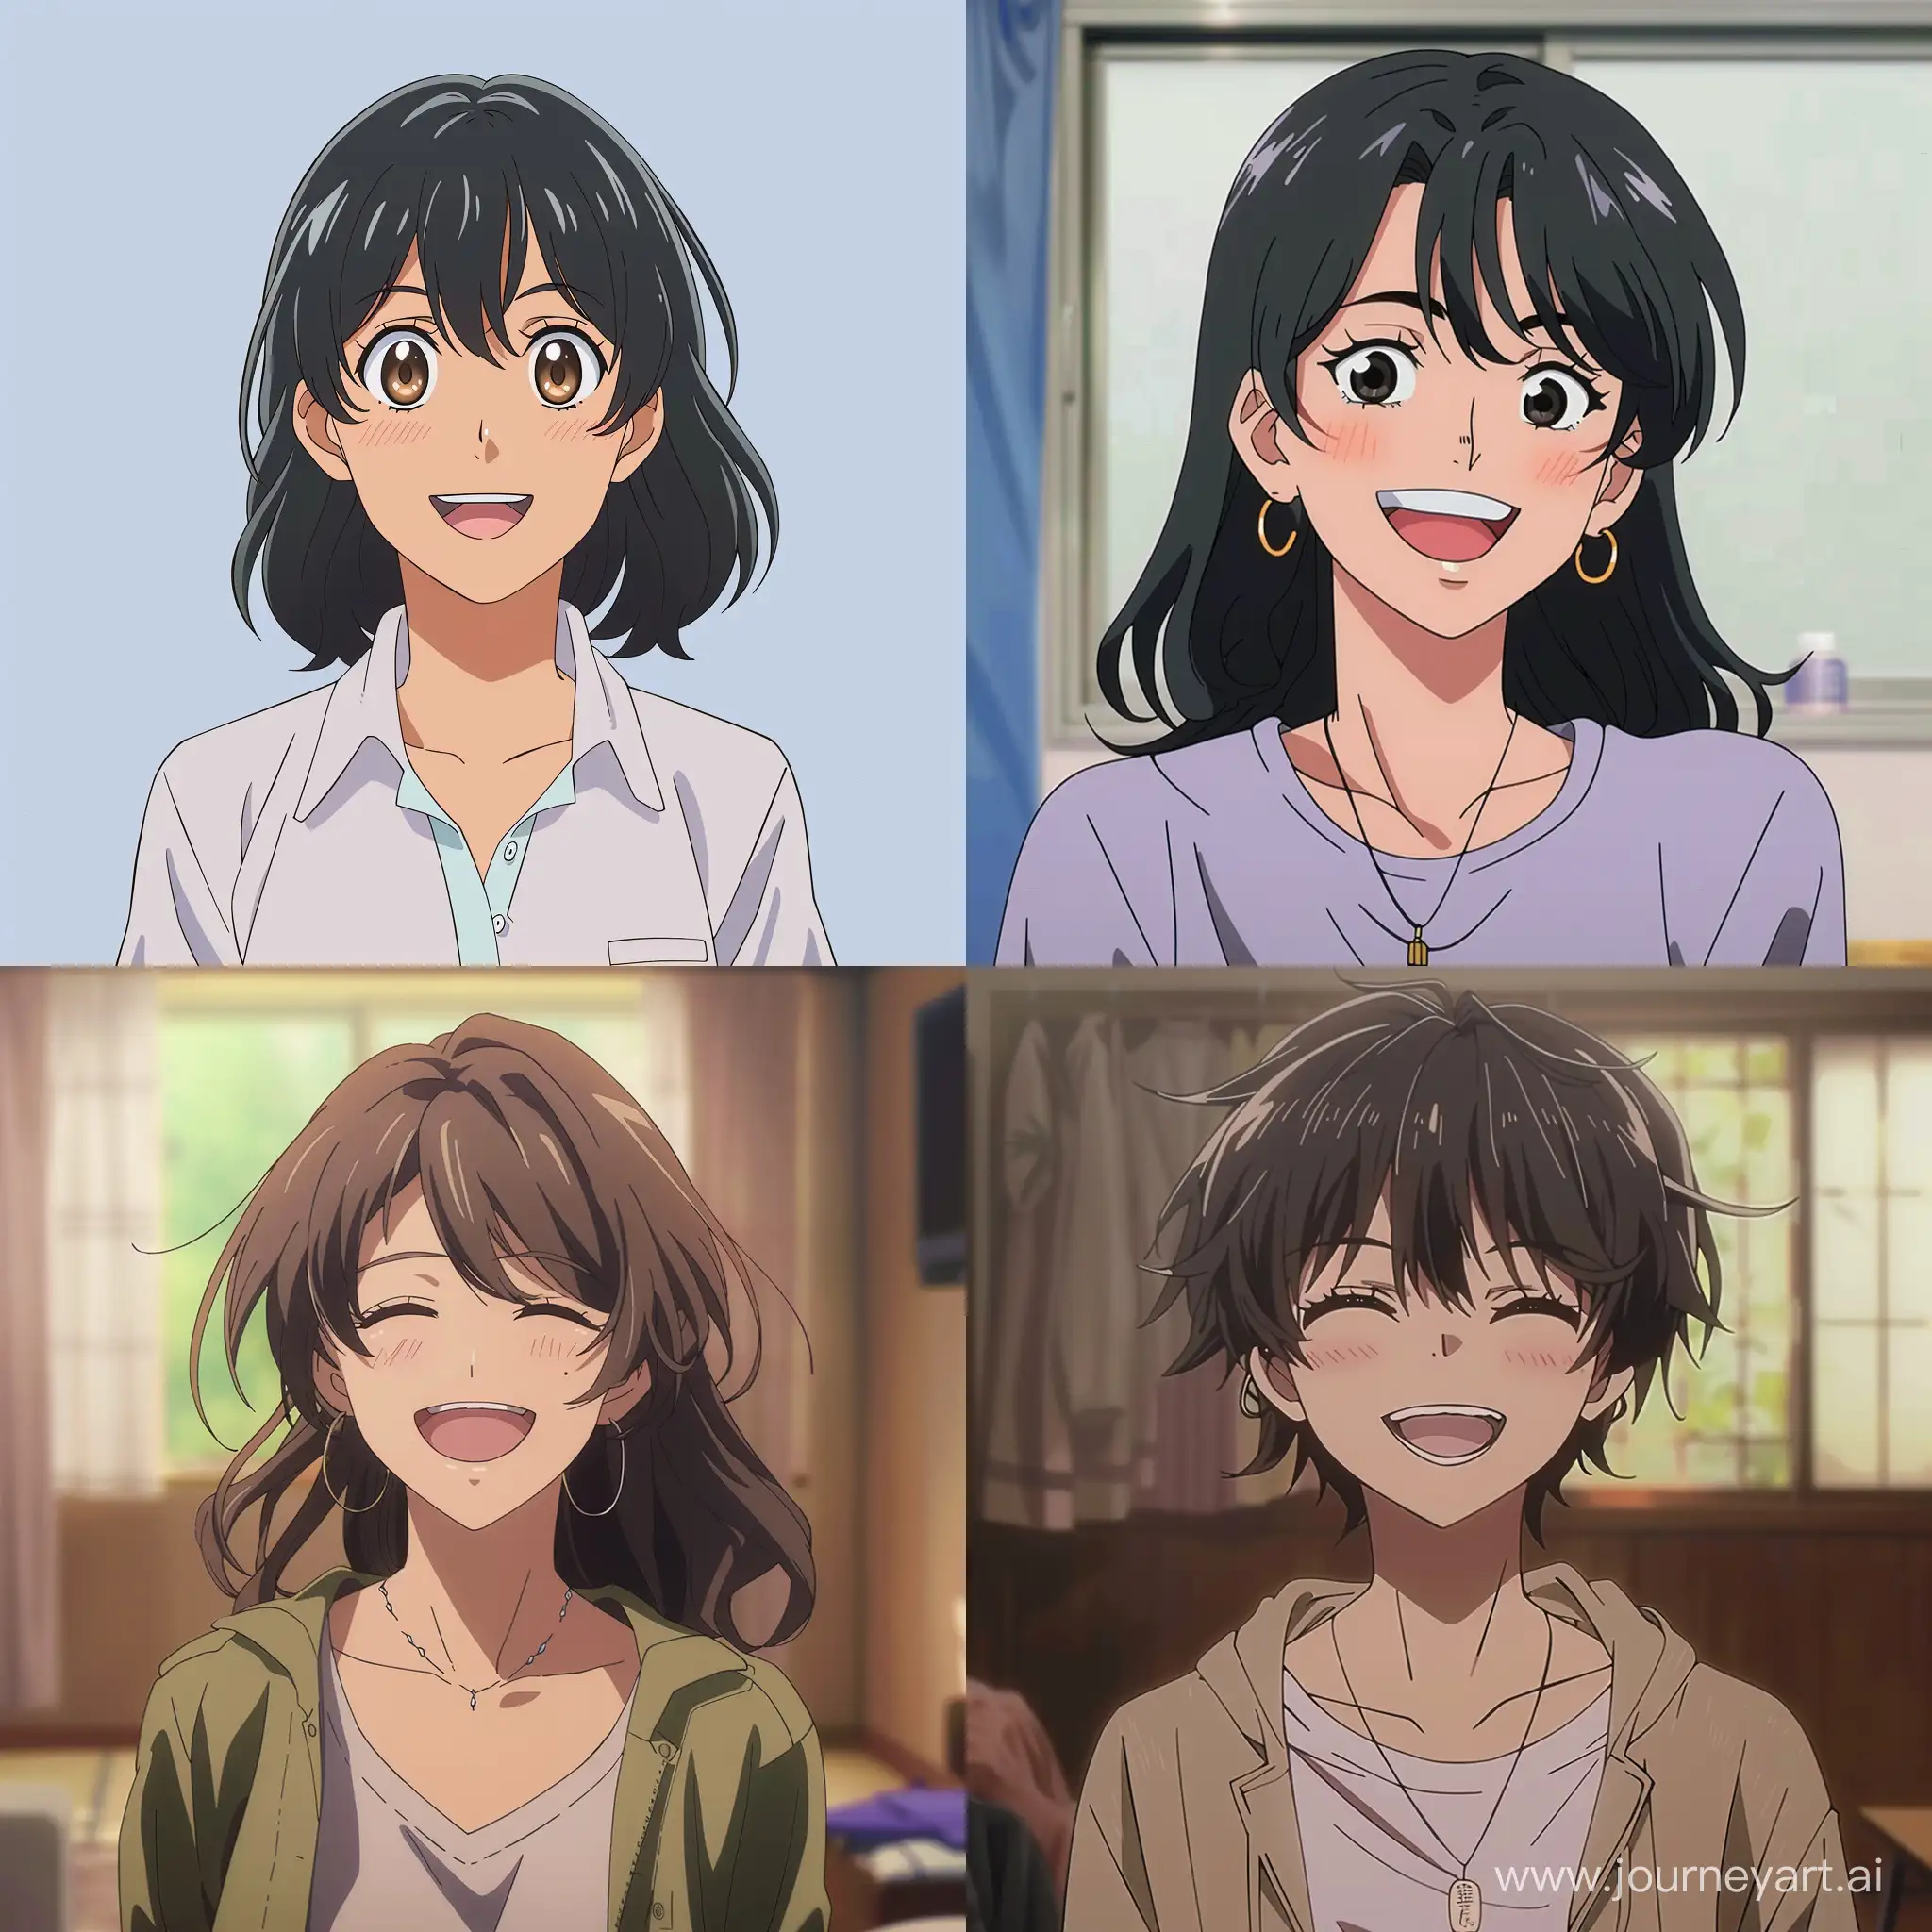 Anime character showing a casual expression, smiling